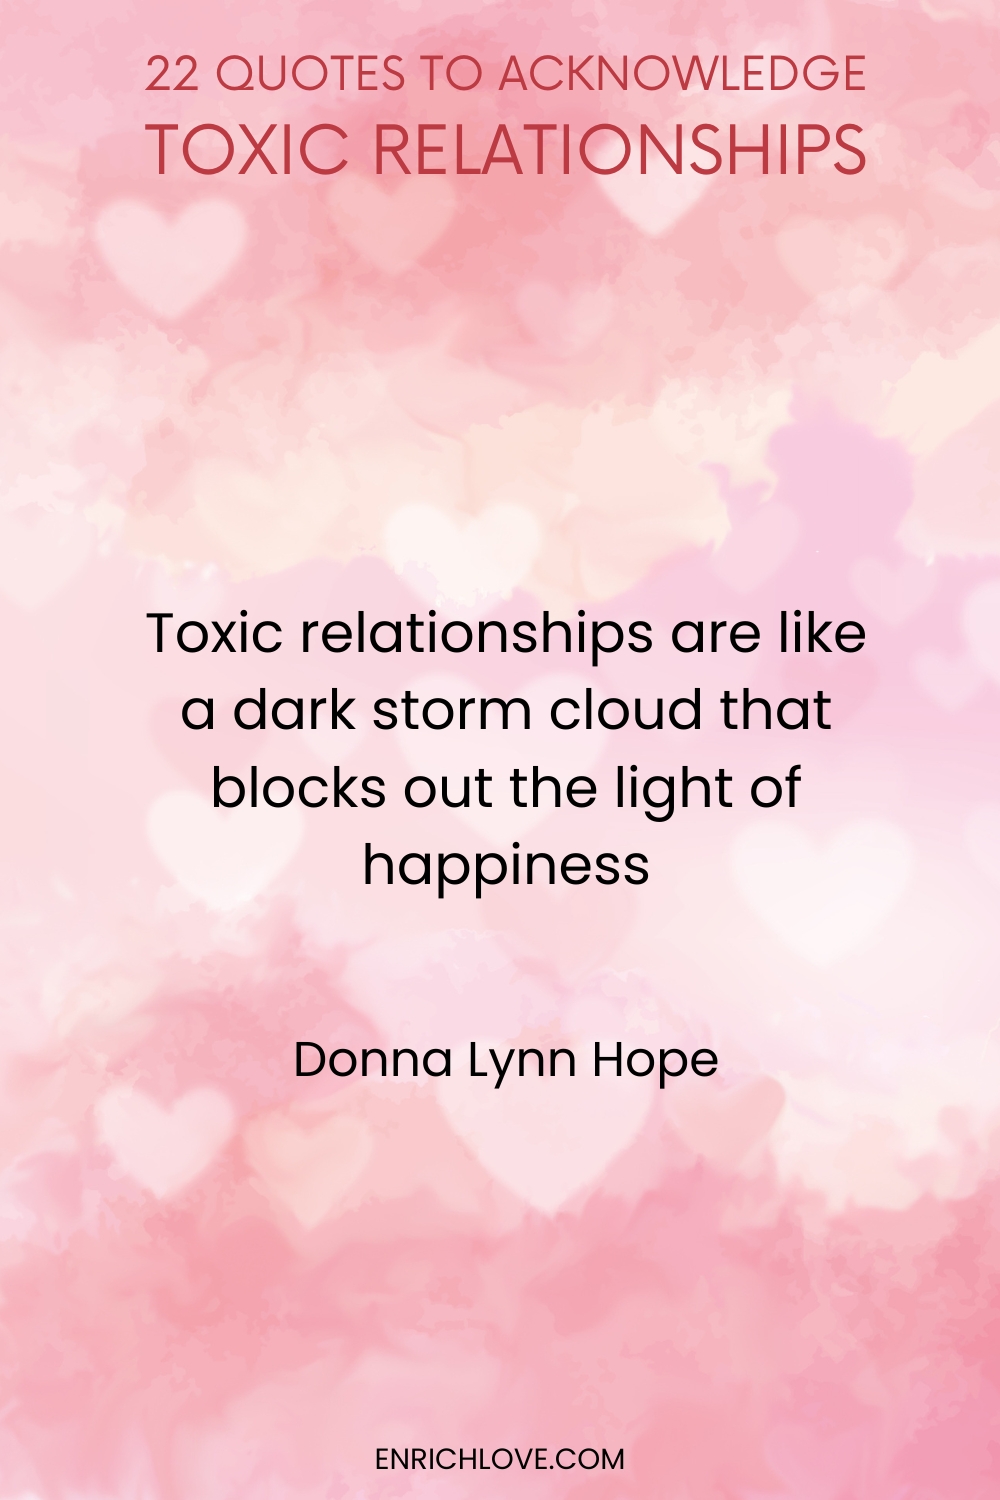 22 Quotes to Acknowledge Toxic Relationships -Toxic relationships are like a dark storm cloud that blocks out the light of happiness by Donna Lynn Hope